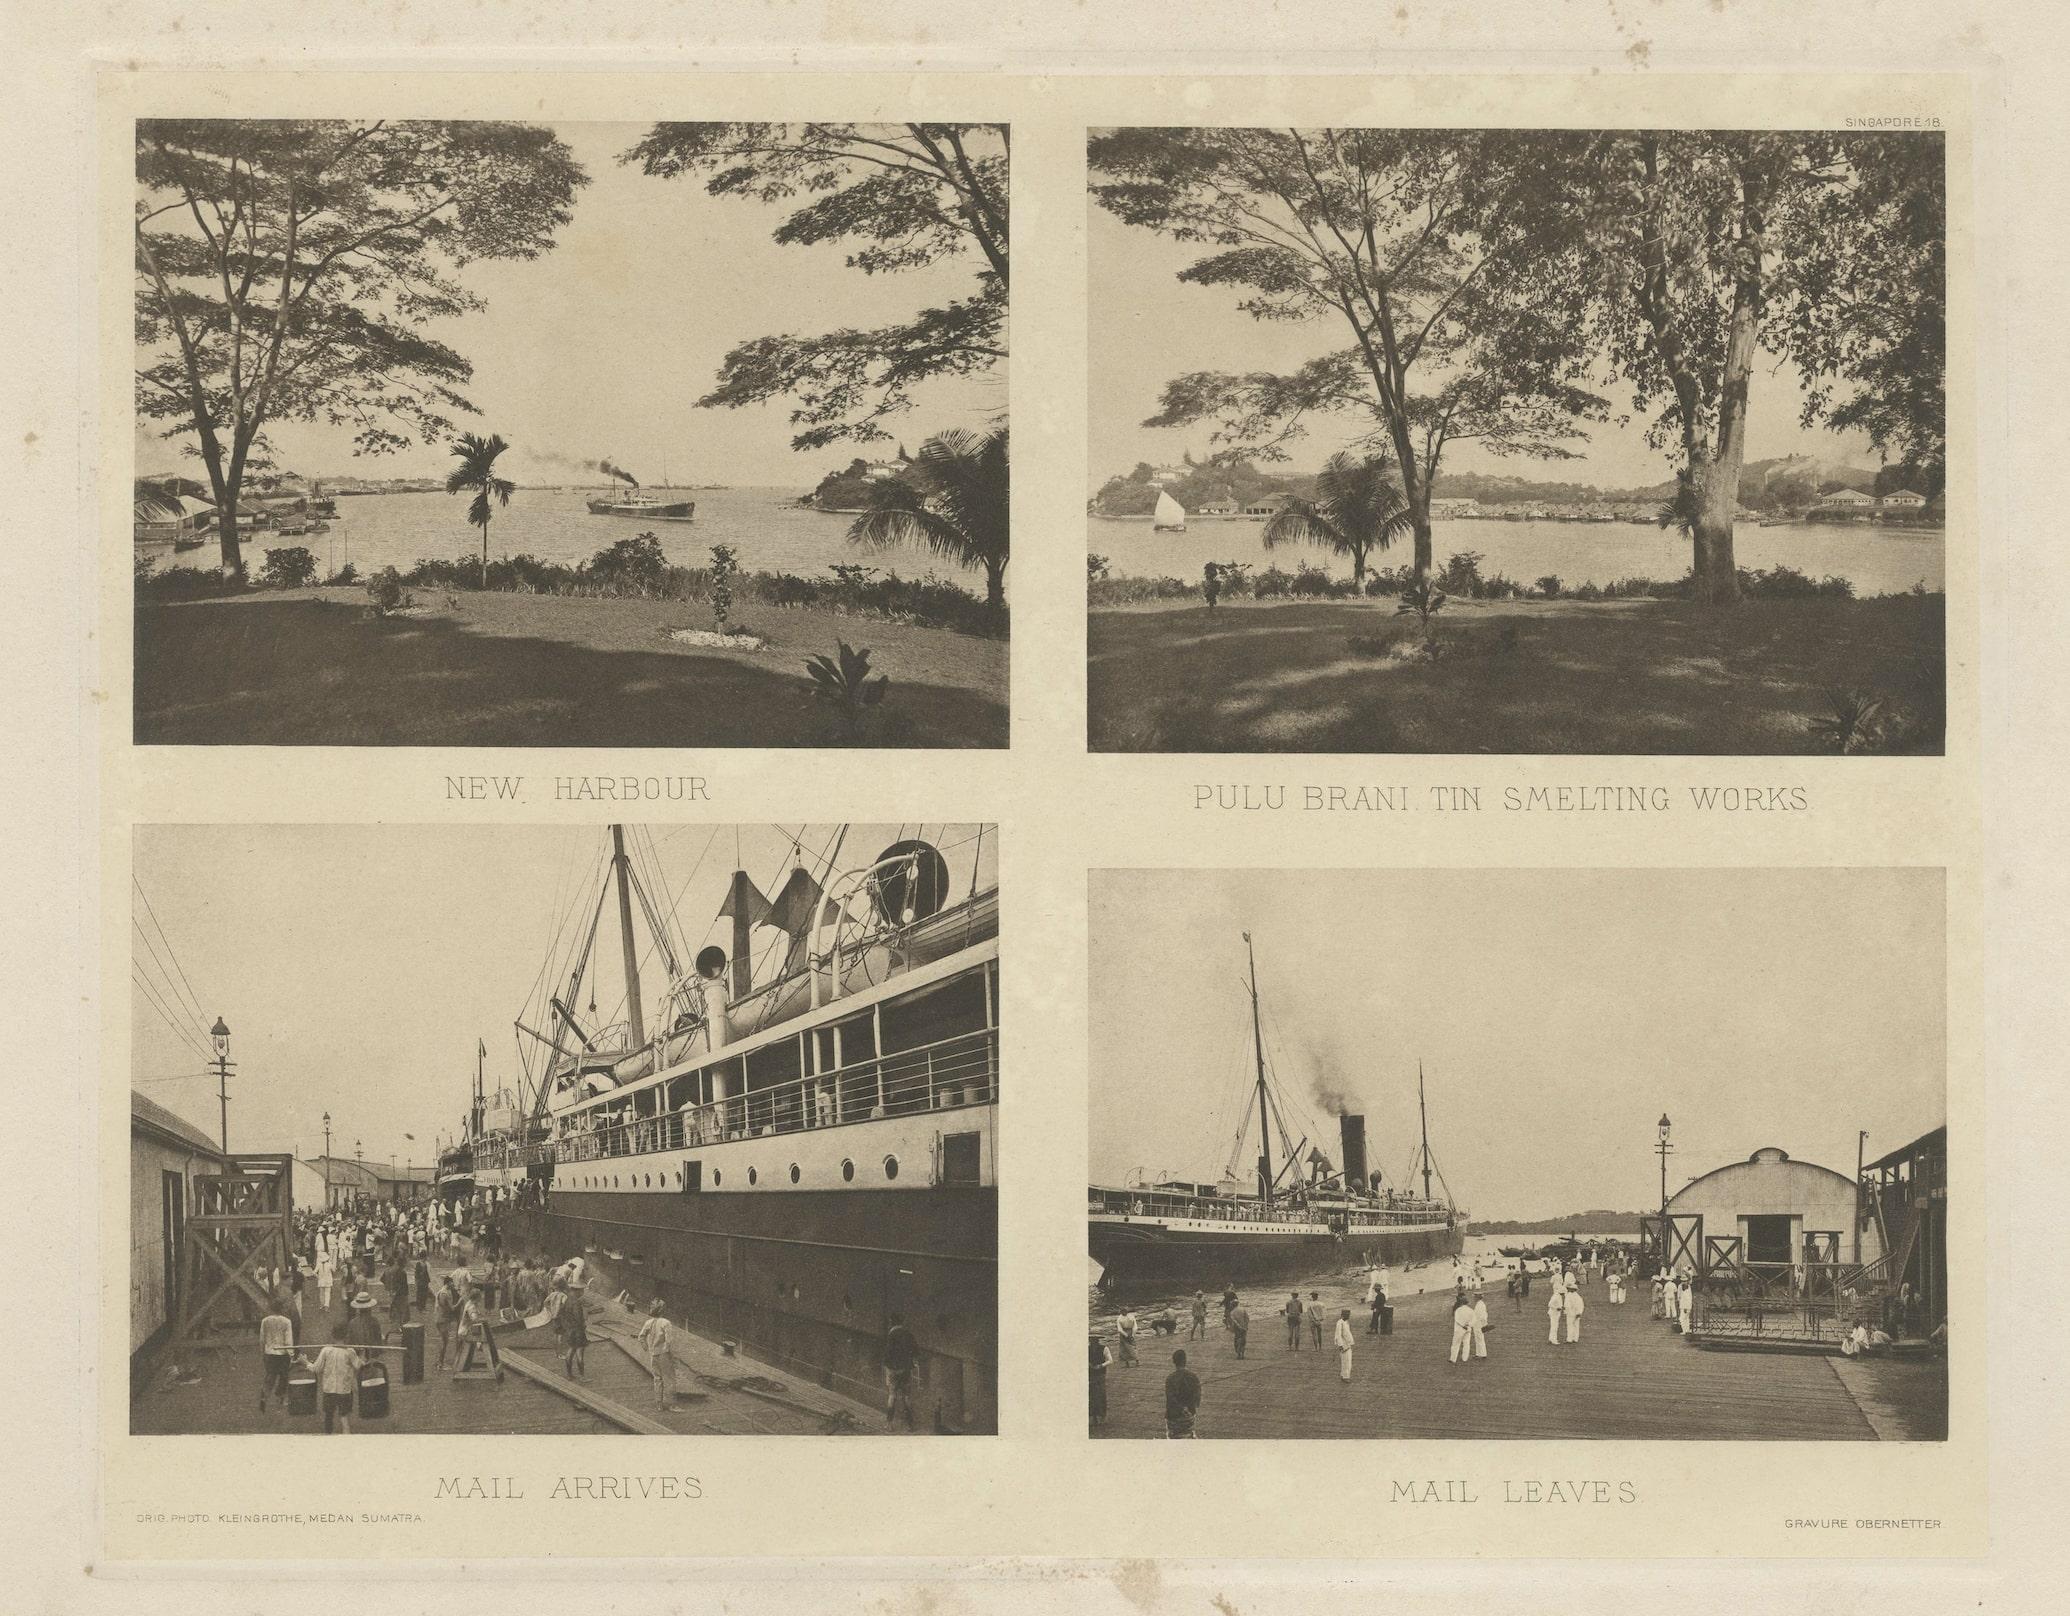 Original antique images of Singapore of the early 20th century. Very rare.

1) New Harbour
2) Pulu Brani Tin Smelting Works
3) Mail Arrives
4) Mail Leaves

This rare and original heliograph of is ideal for framing as the image is sharp and